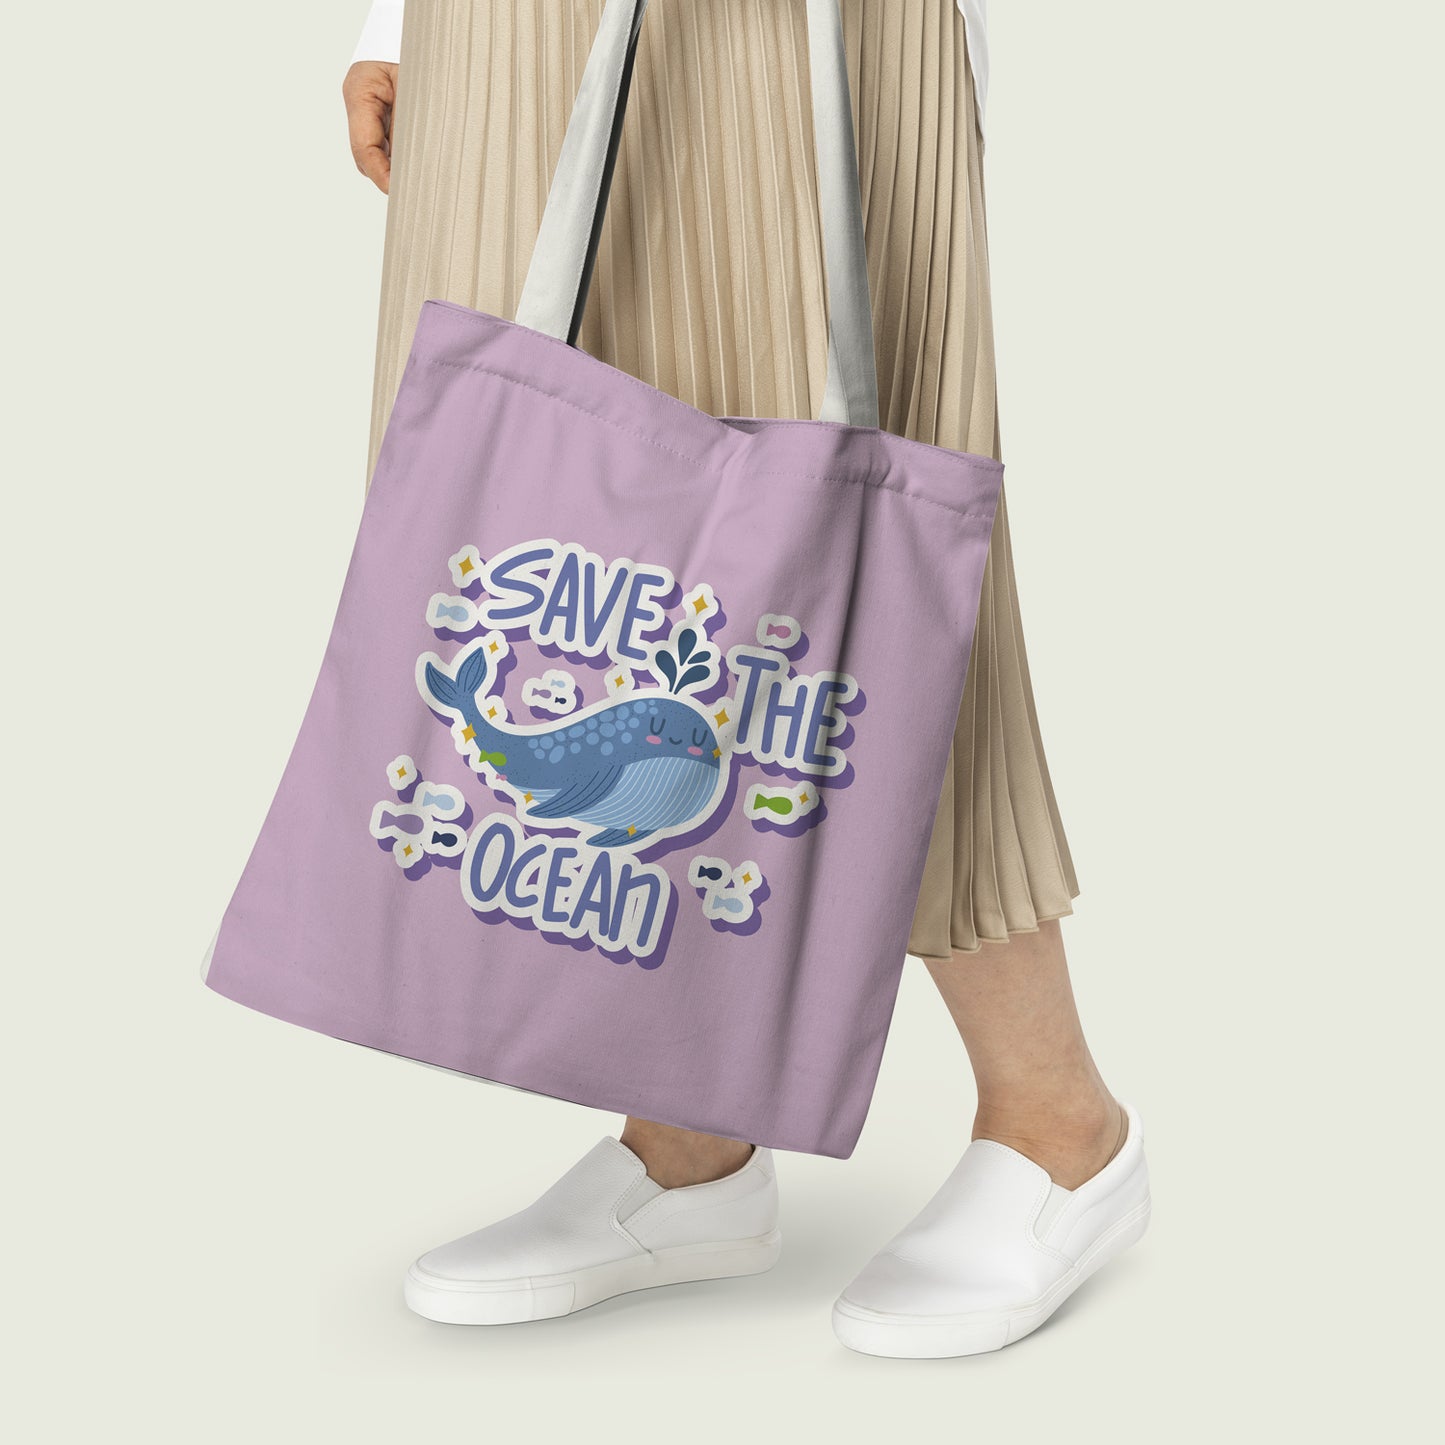 A reusable tote bag with a design promoting ocean conservation, encouraging people to save the ocean.